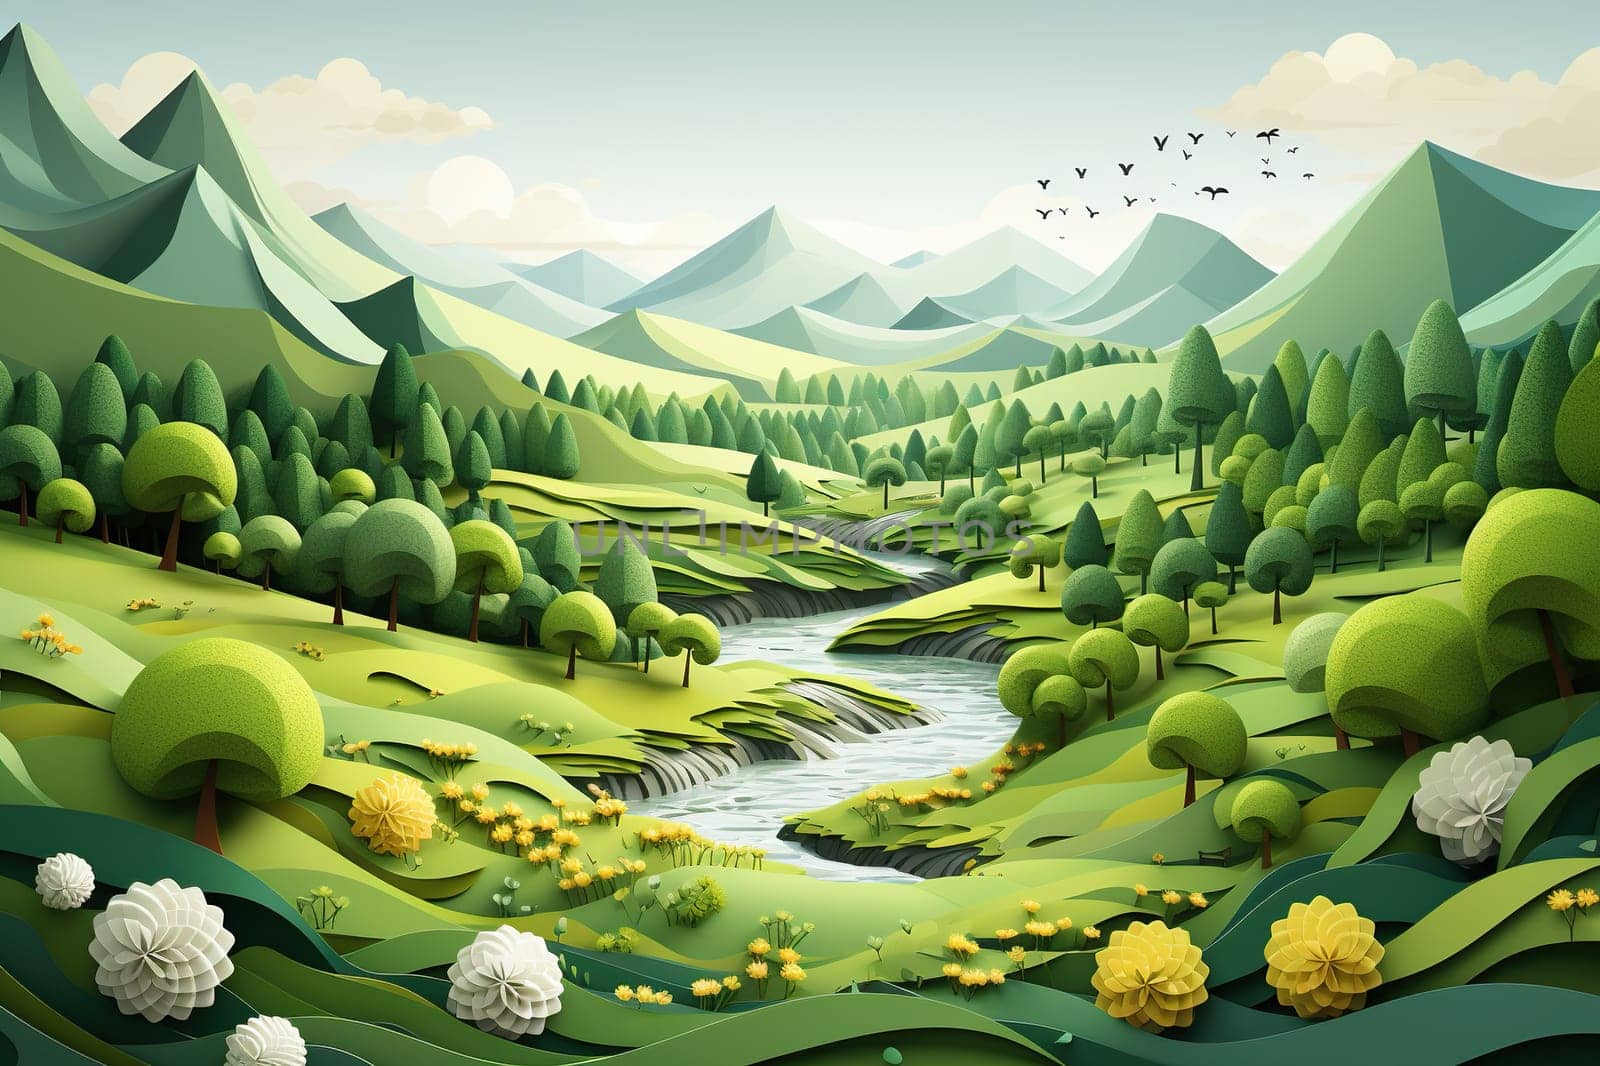 Summer landscape with mountains, green grass and river in paper cut style.